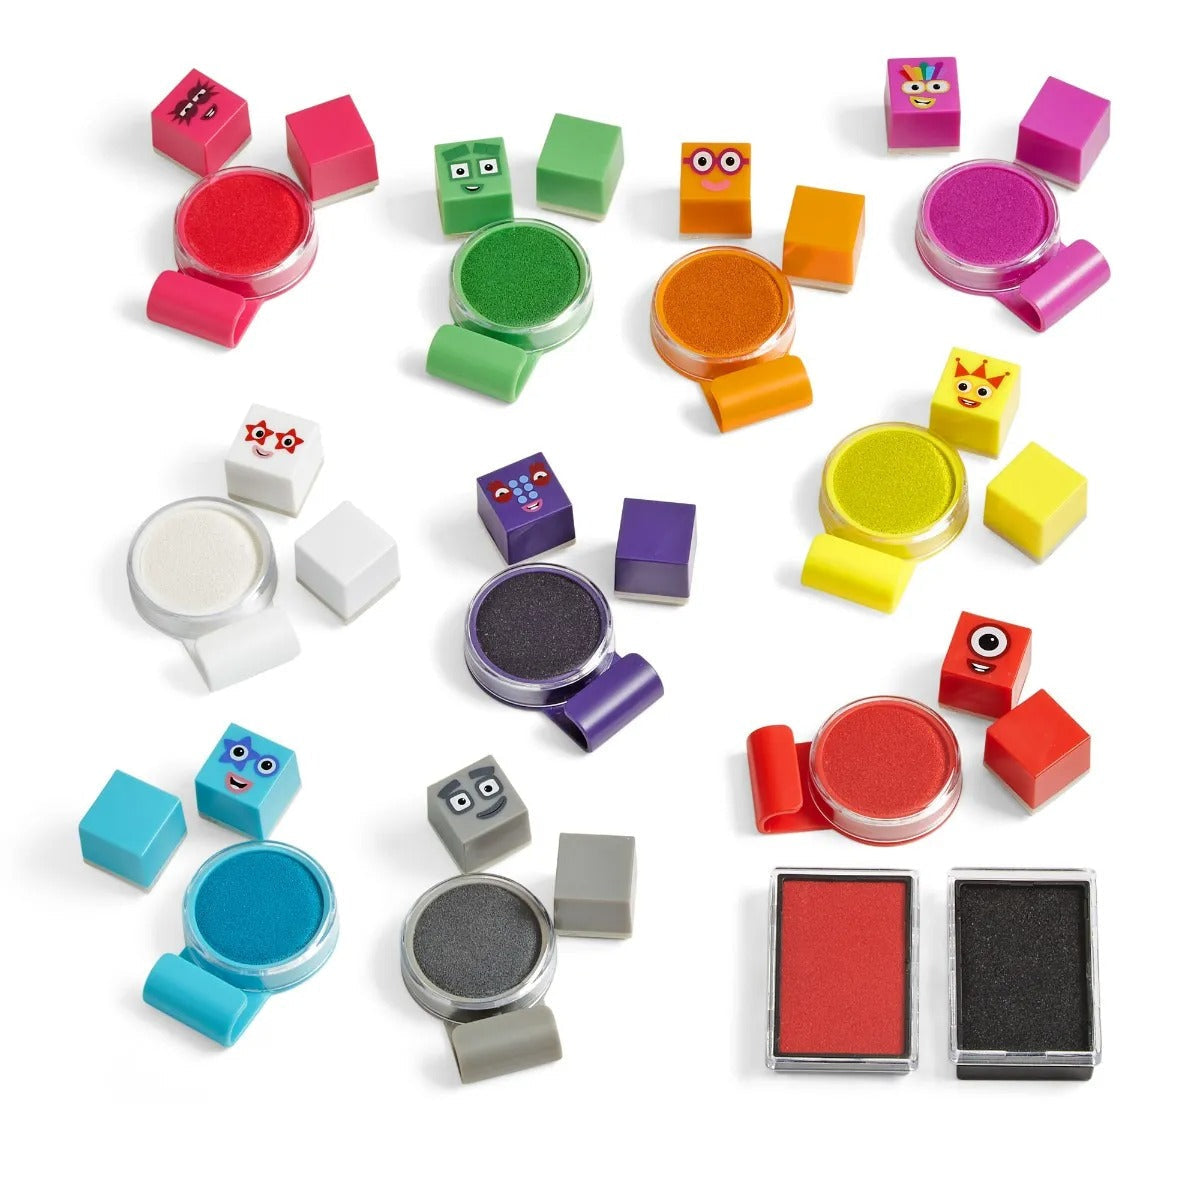 Numberblocks Stampoline Park Stamp Activity Set, With reusable stamps and washable inks in the Numberblocks unique colours, children can create their own Numberblocks adventures based on the popular Stampoline Park episode. This 32-piece Numberblocks craft kit includes 20 stamps to create the Numberblocks One to Ten, and 12 ink pads with washable inks. It’s ideal for Numberblocks-inspired creative activities in the classroom or at home. These are the CBeebies Numberblocks toys that allow children to express